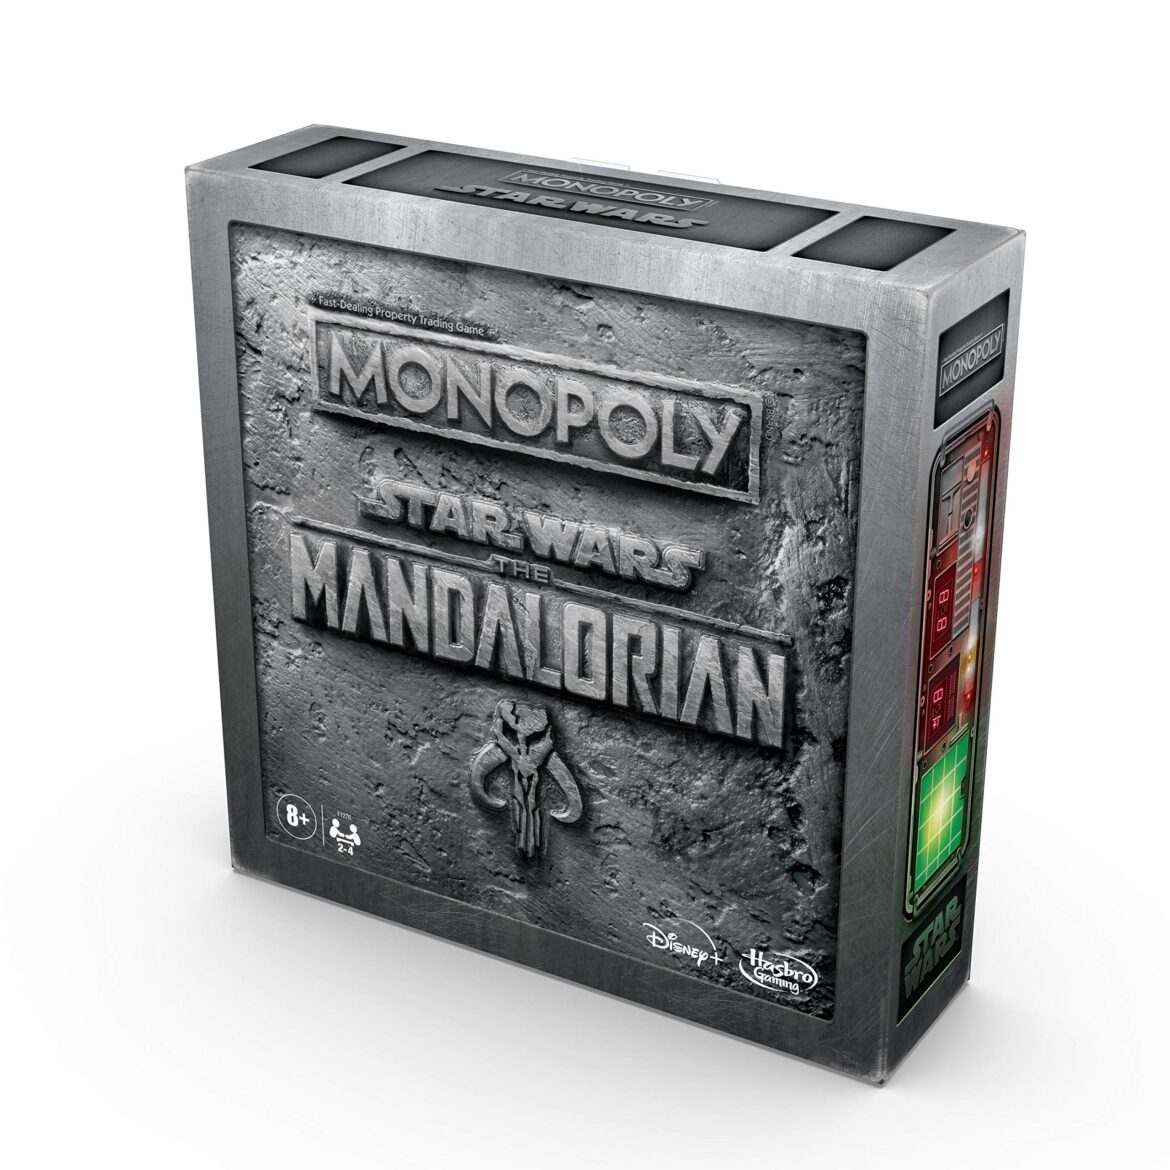 Mandalorian Monopoly is a Must Own for Star Wars Fans